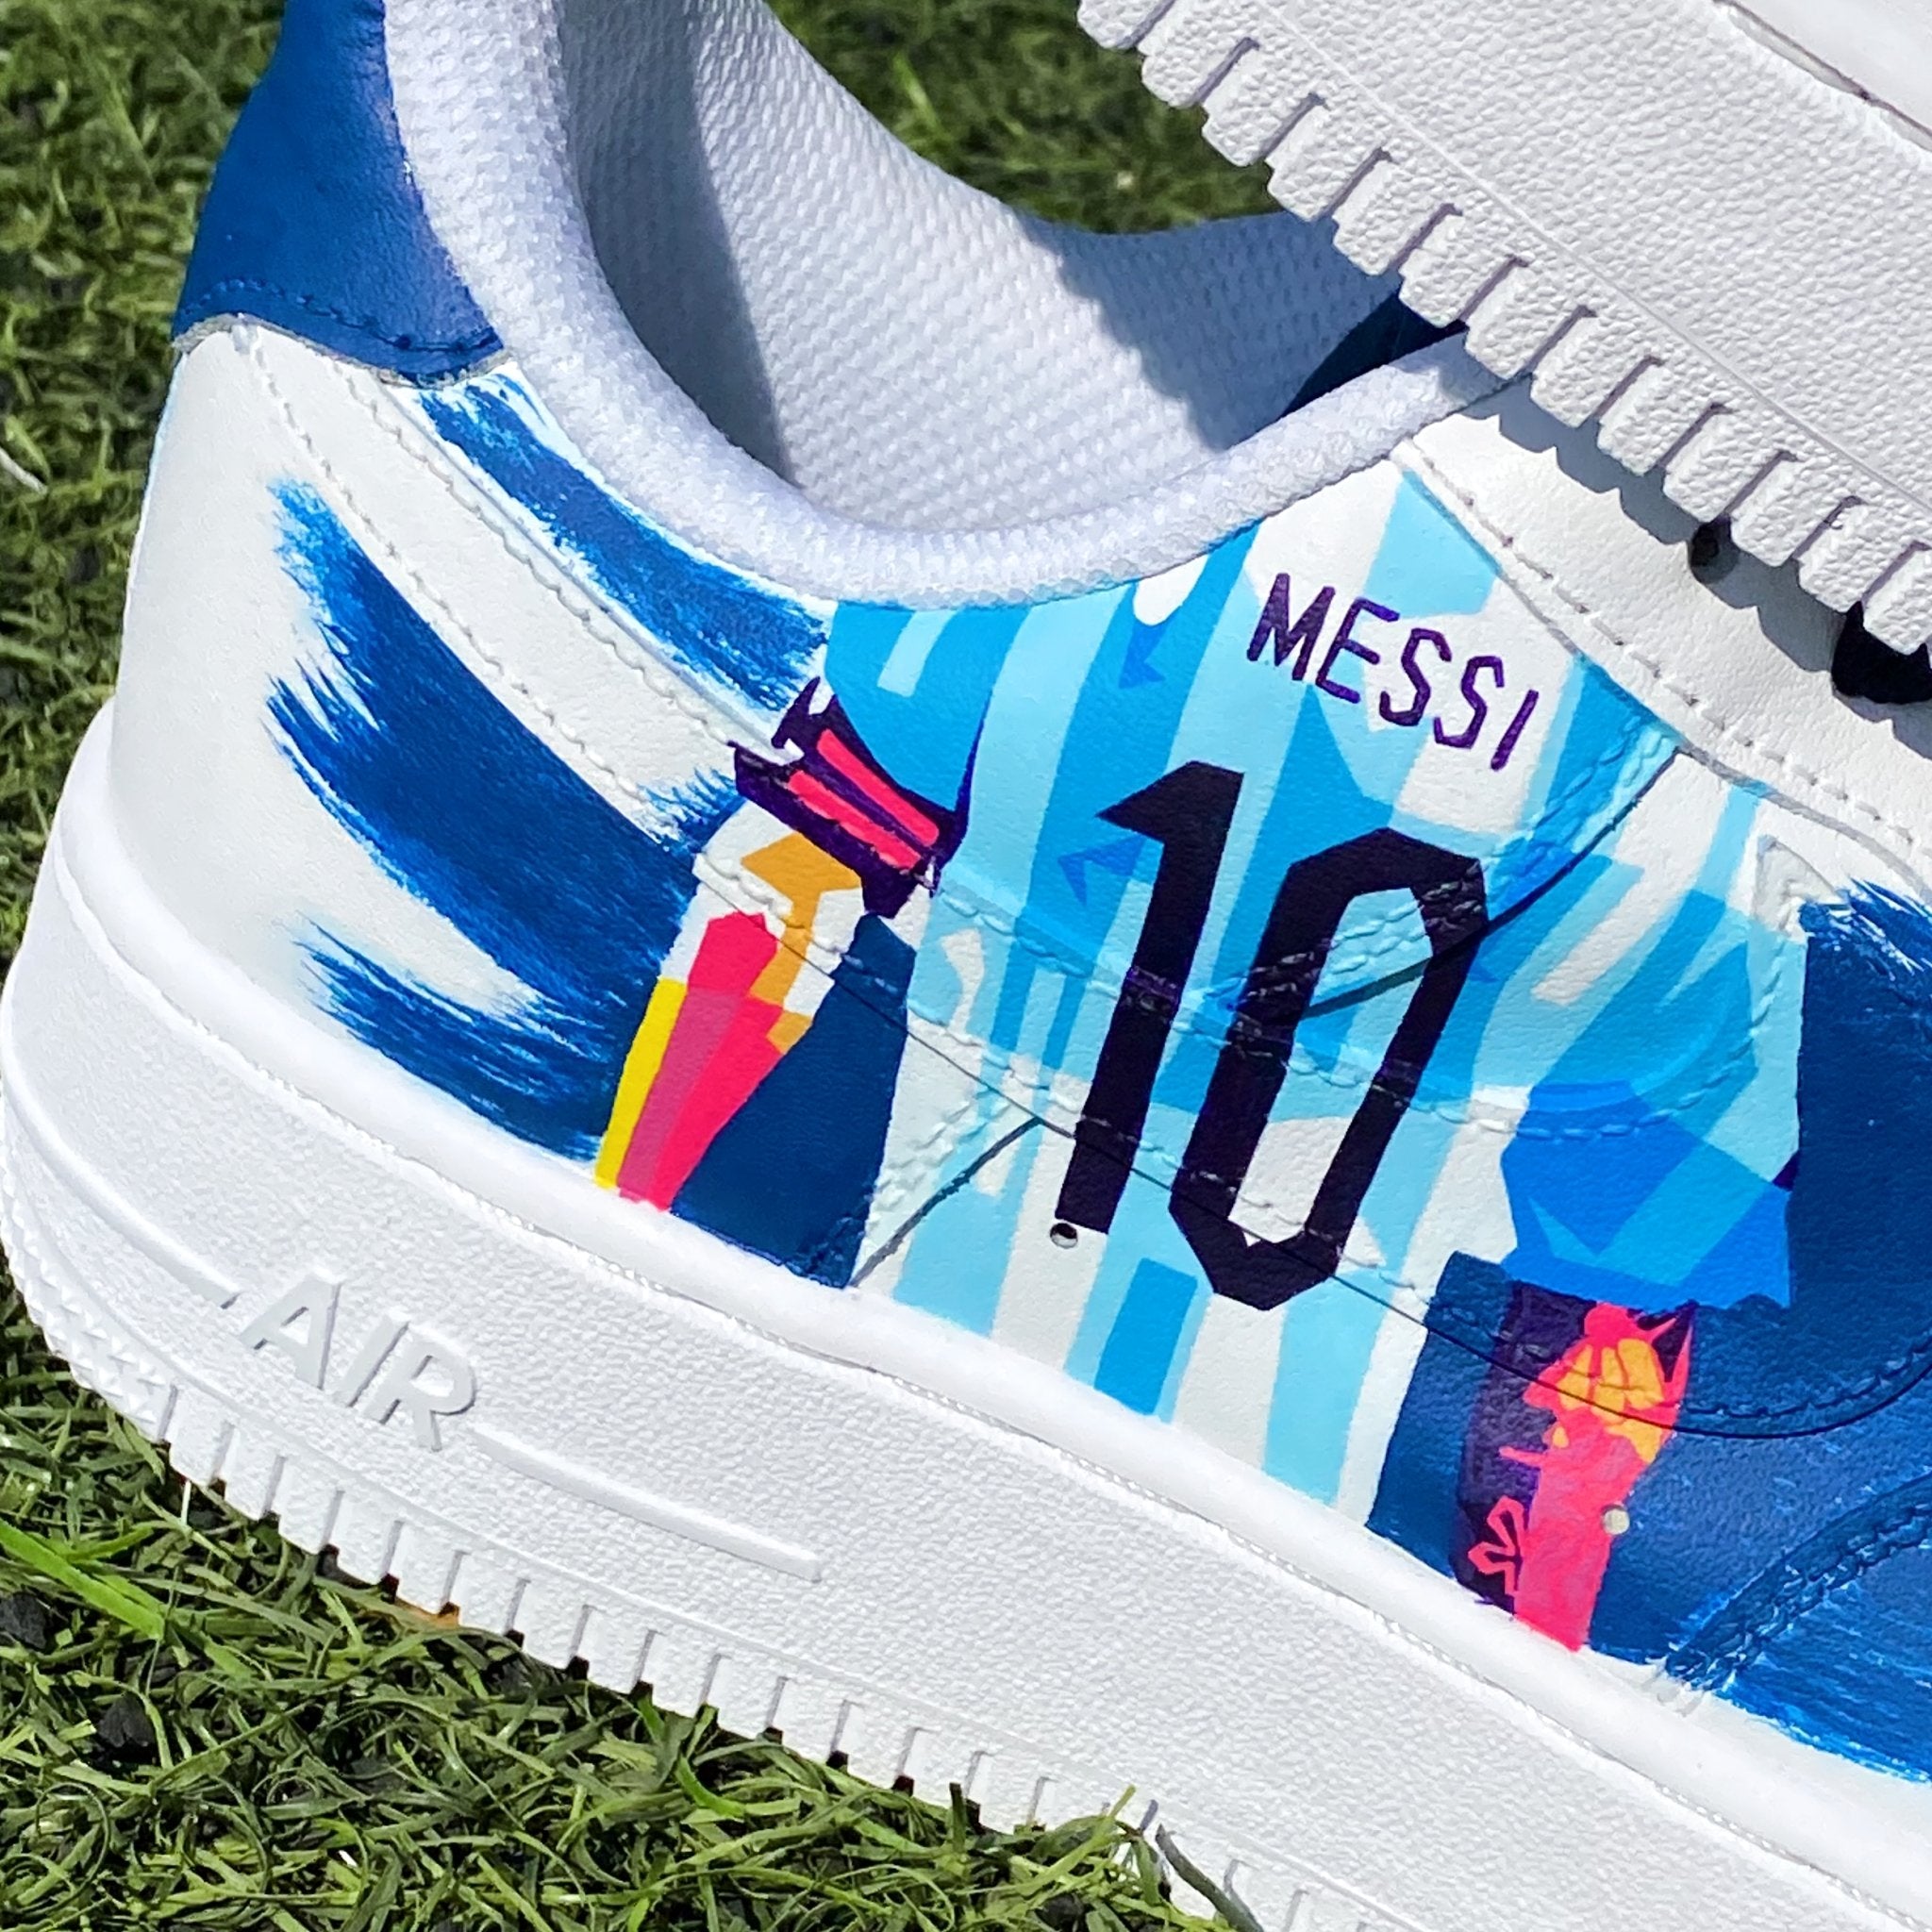 Air Force 1 x Messi Colores - Art Force Custom